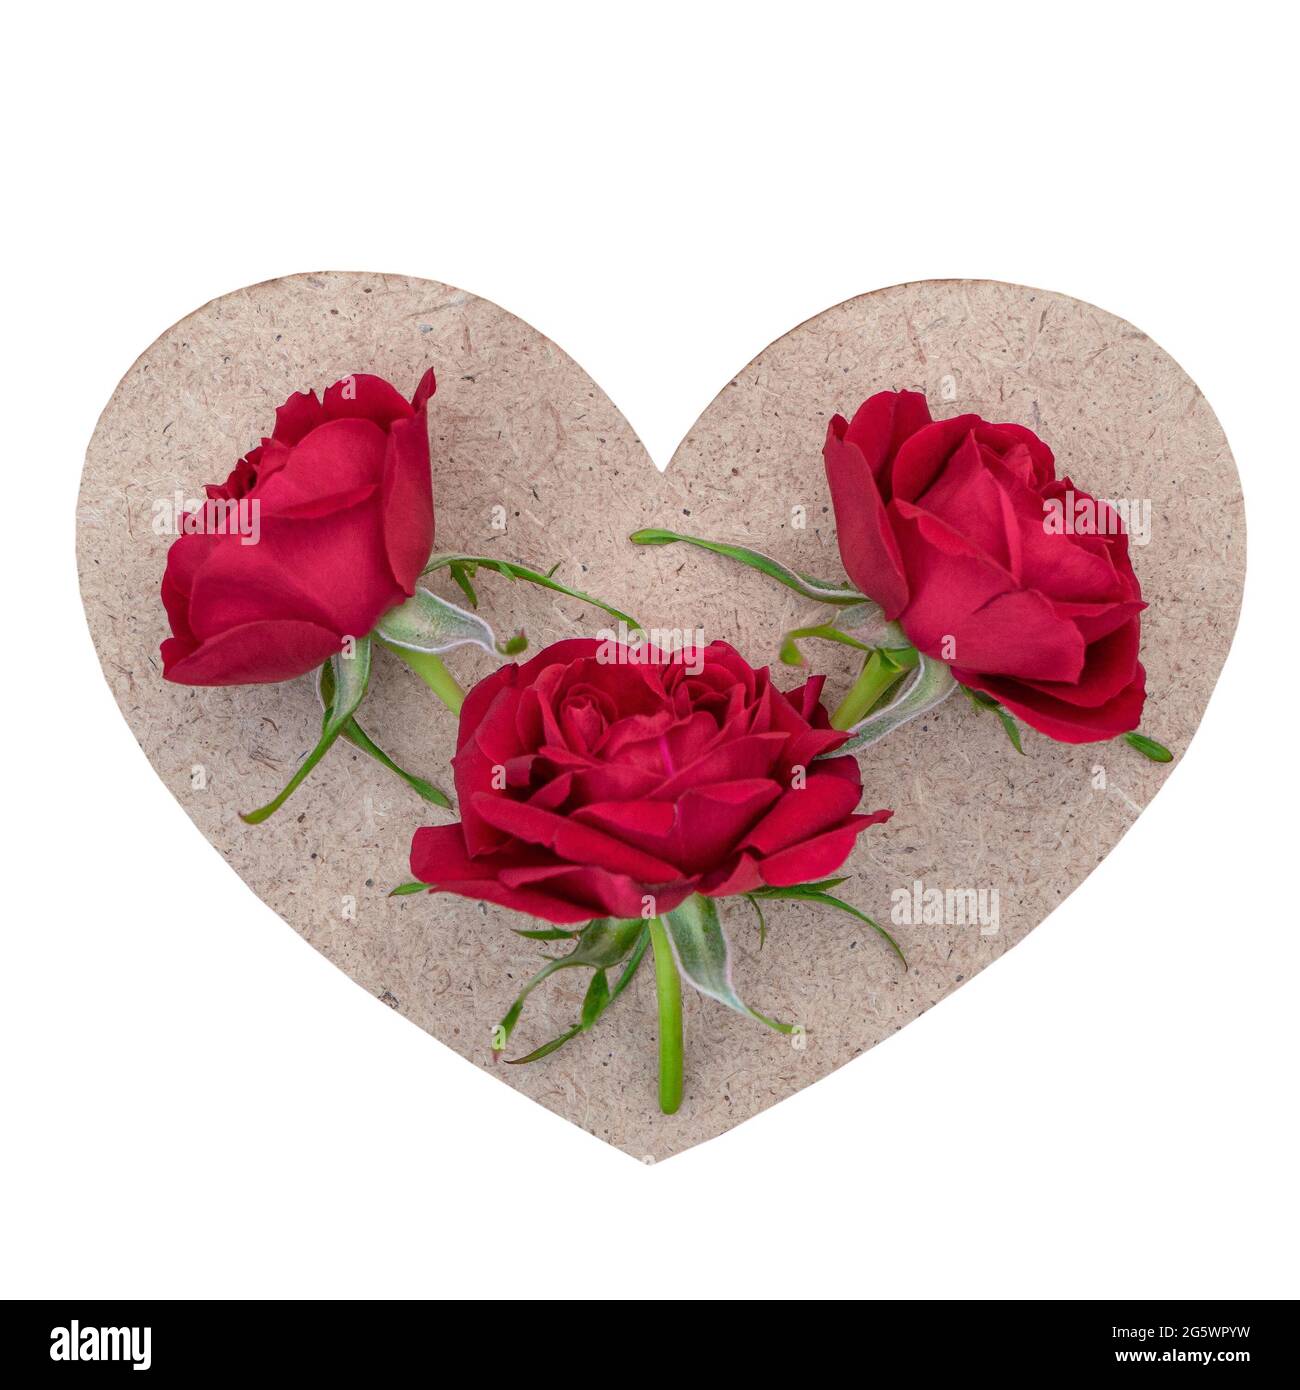 Heart with red roses isolated on a white background. Stock Photo